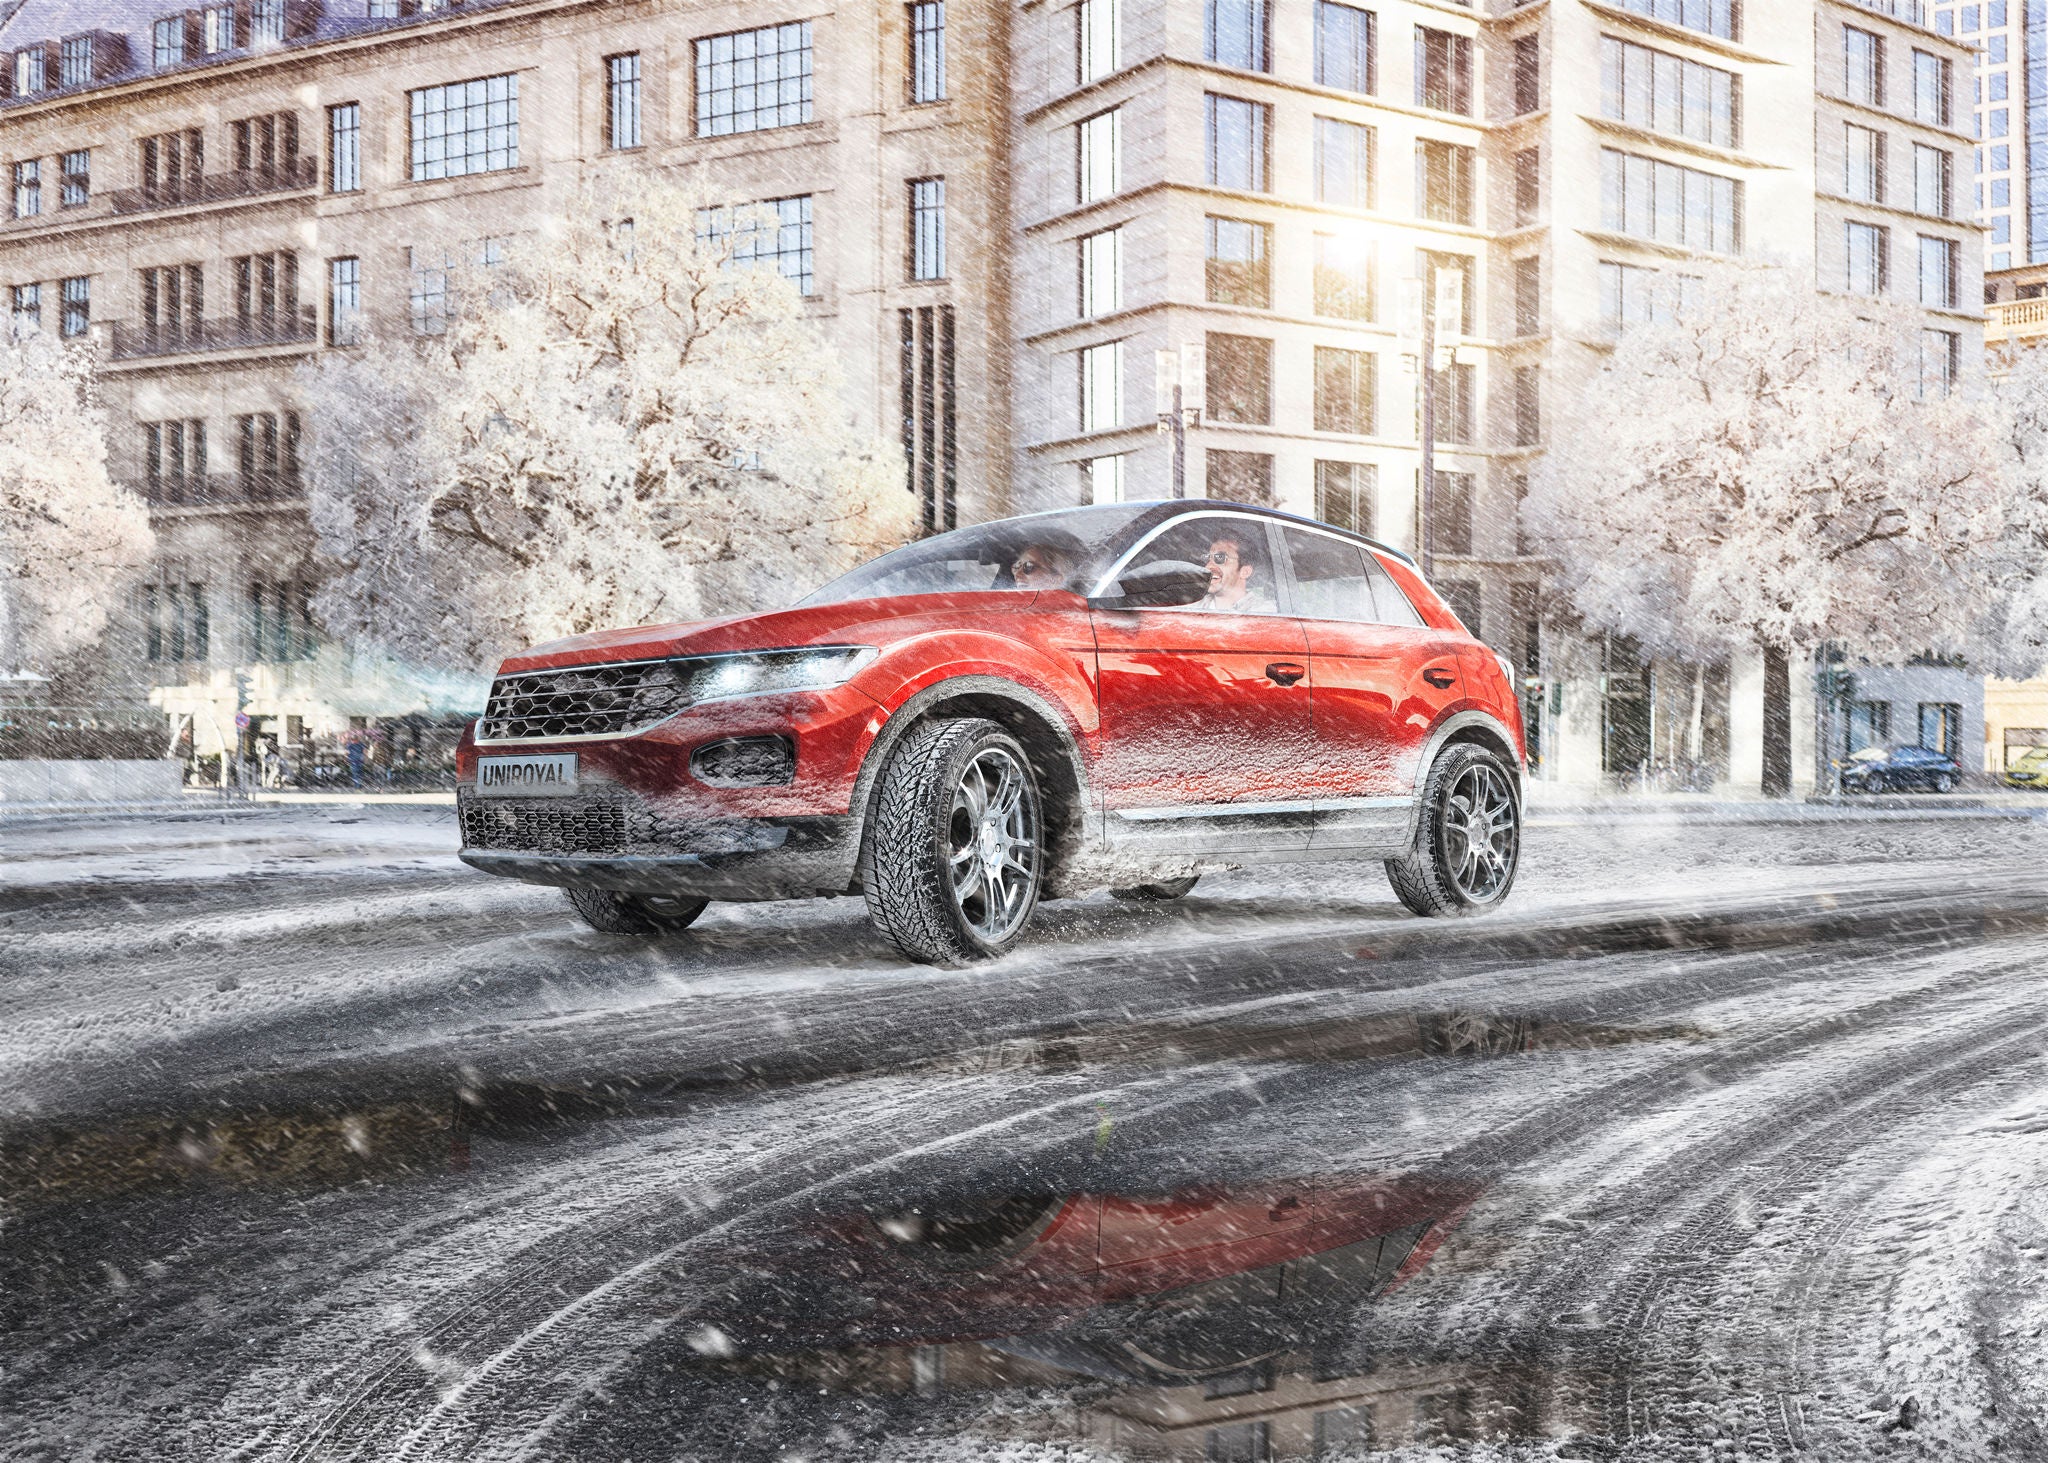 Red SUV driving on snowy city roads on Uniroyal WinterExpert tyres